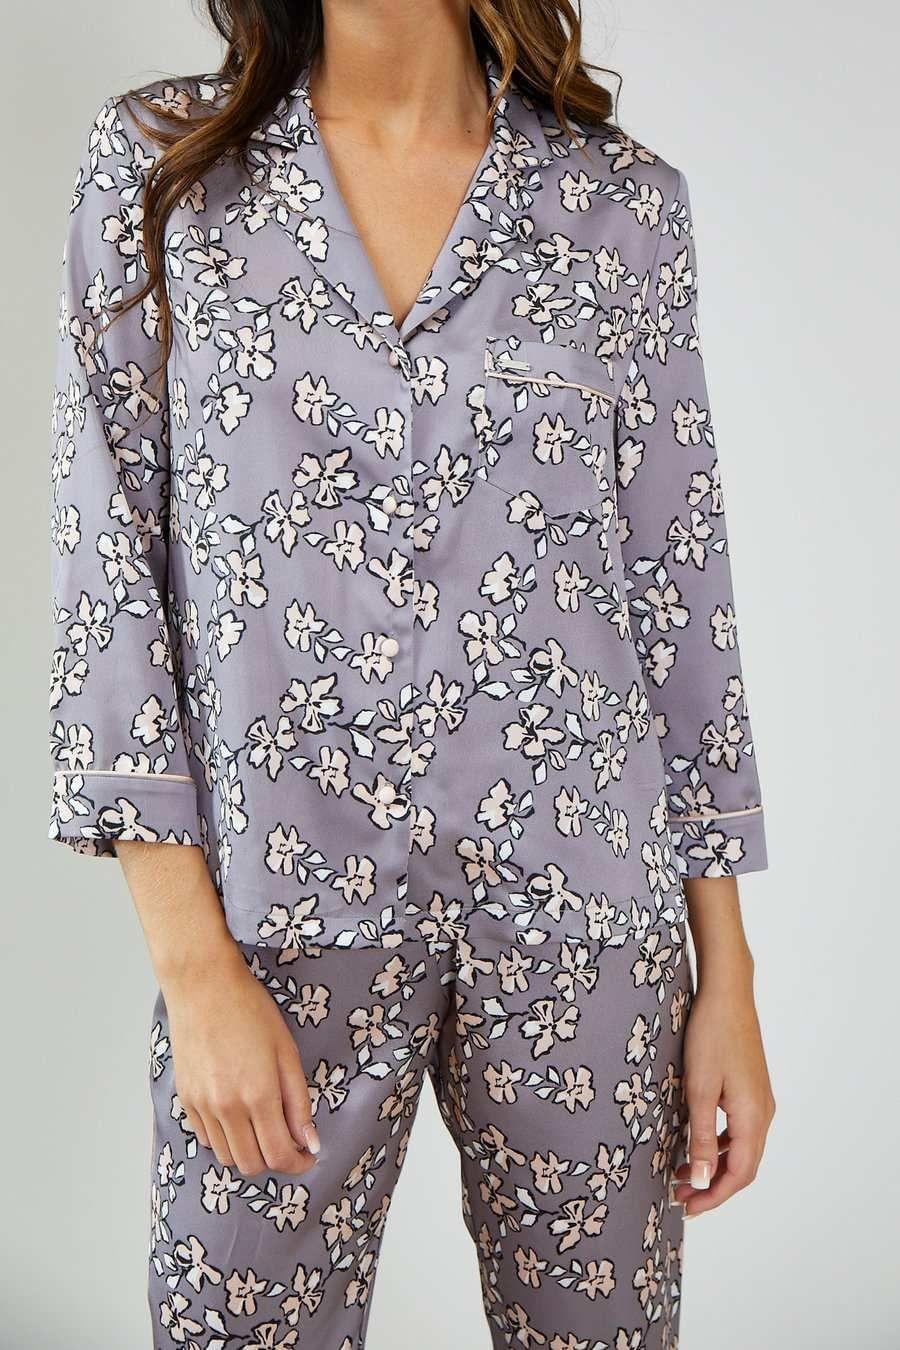 Mix and Match Floral Shirt in Dove Grey (Shirt only)